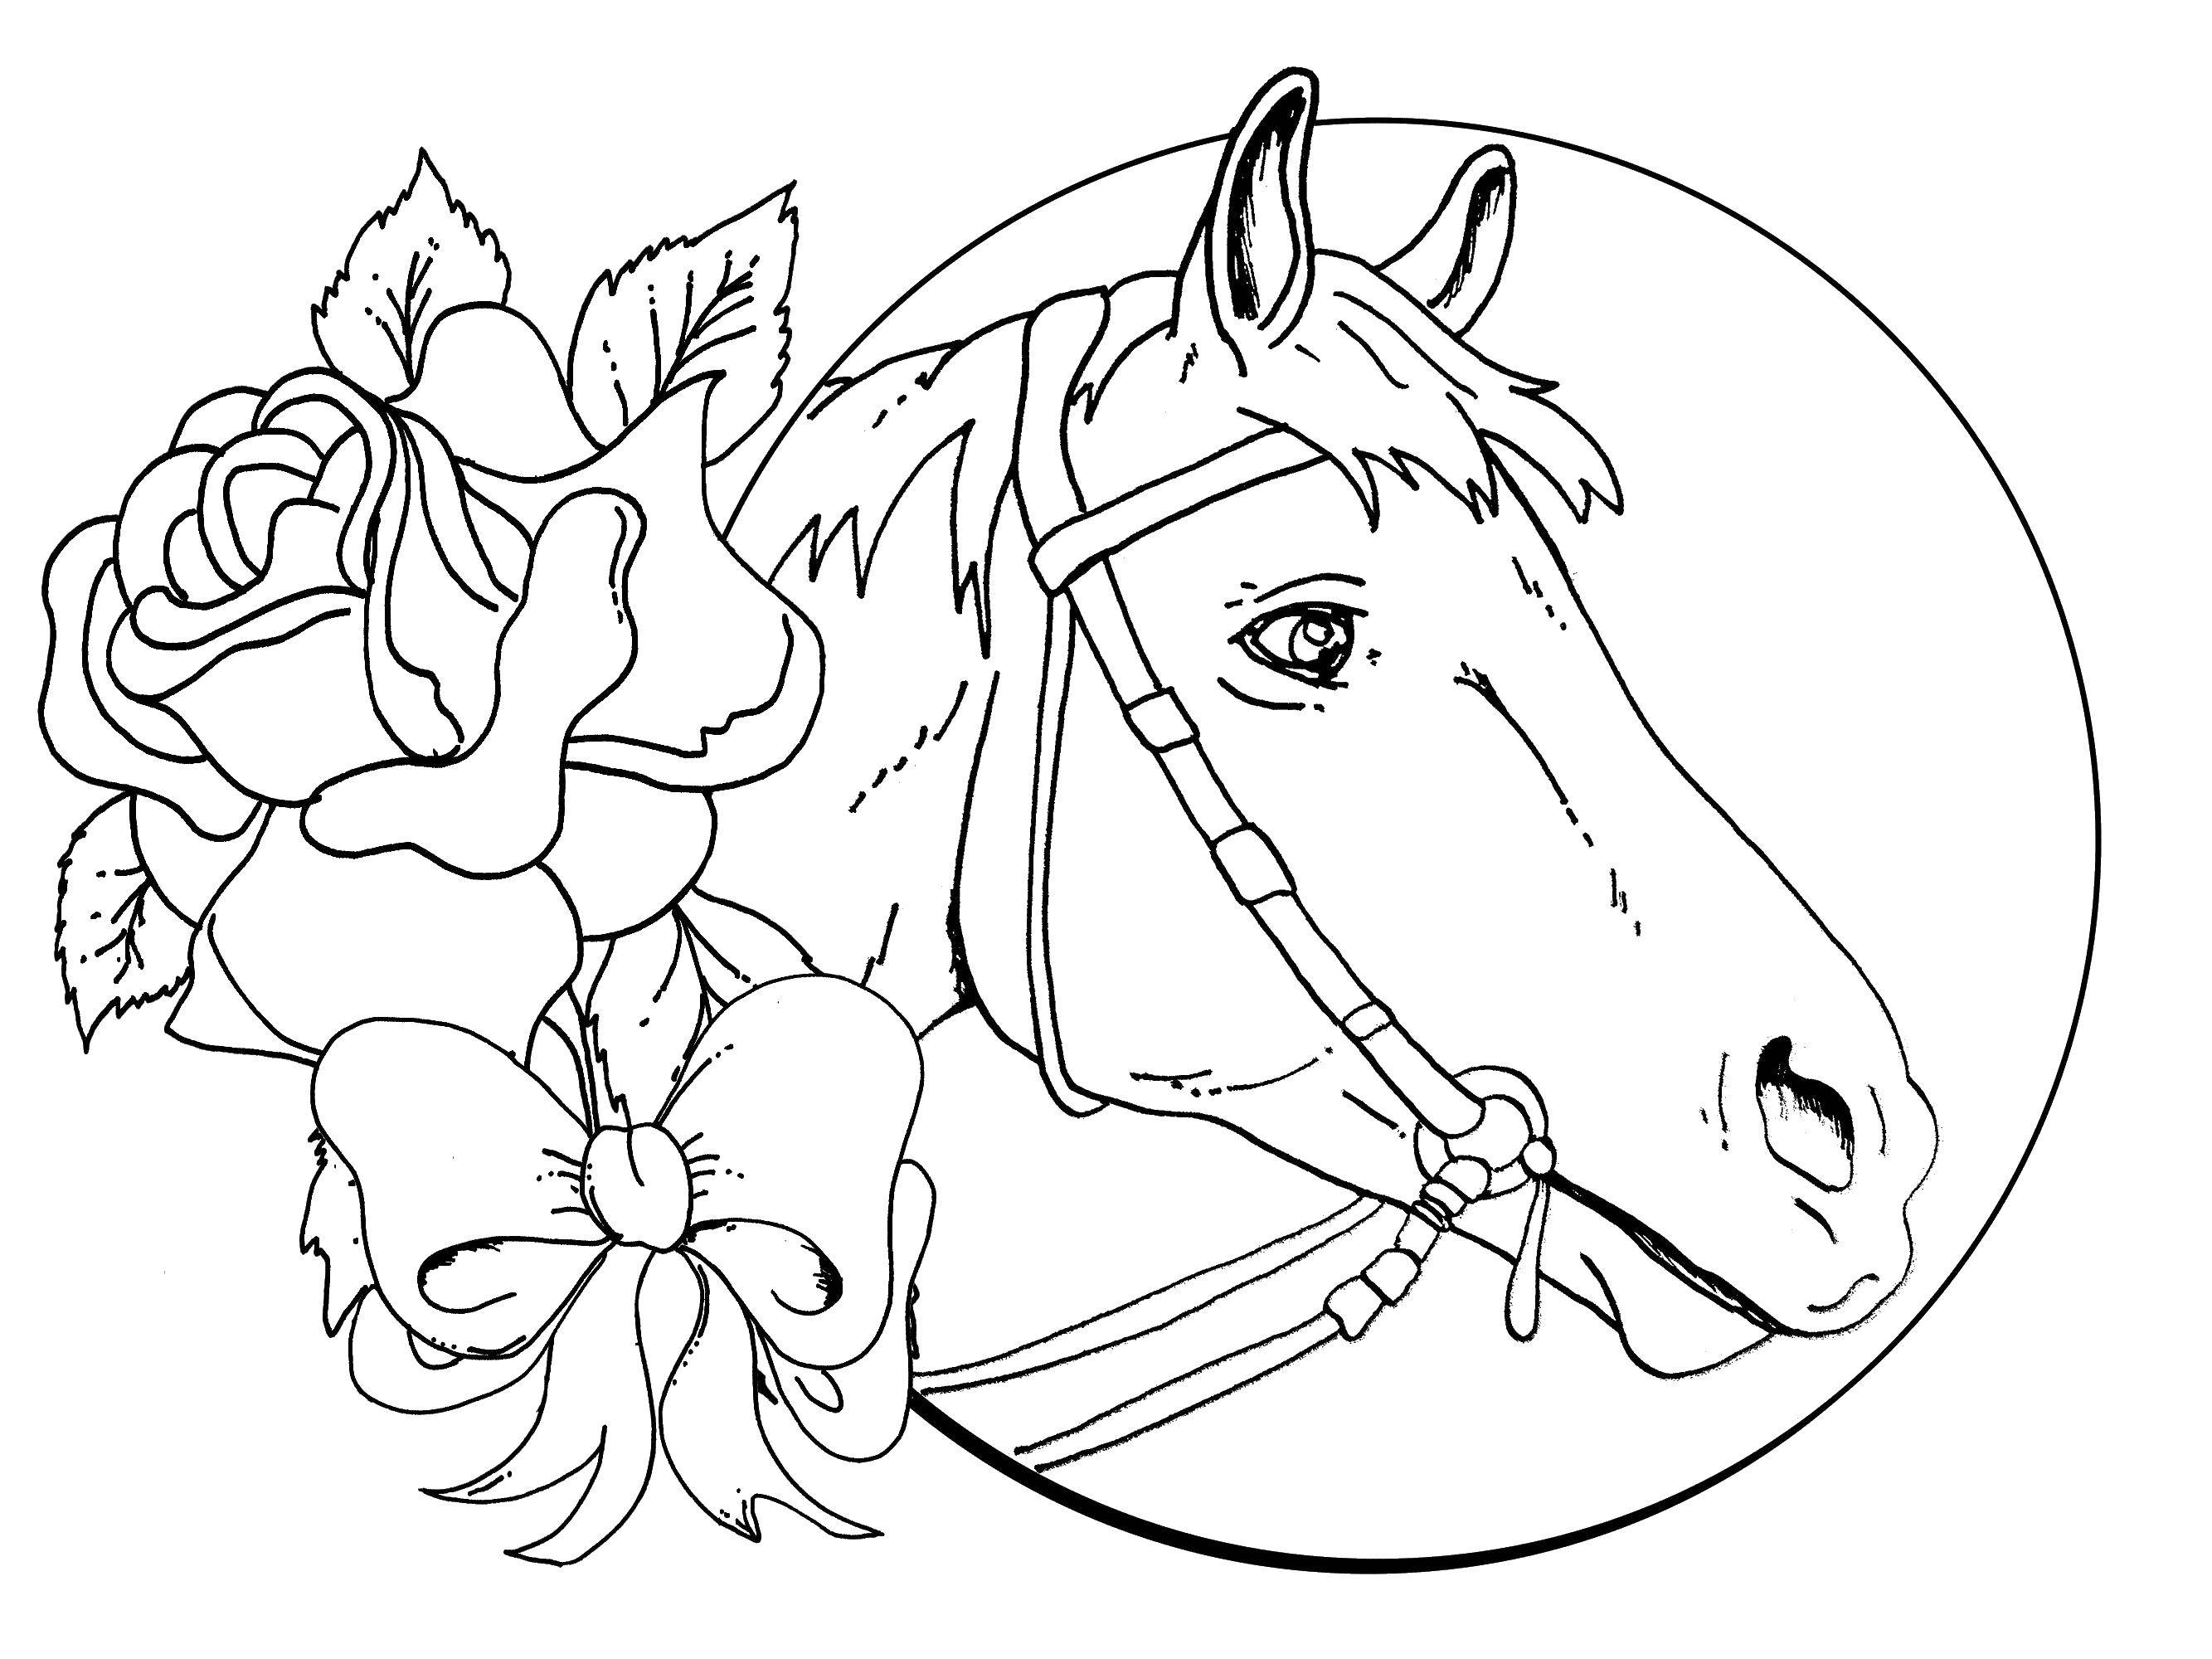 Coloring Horse. Category Pets allowed. Tags:  Horse.